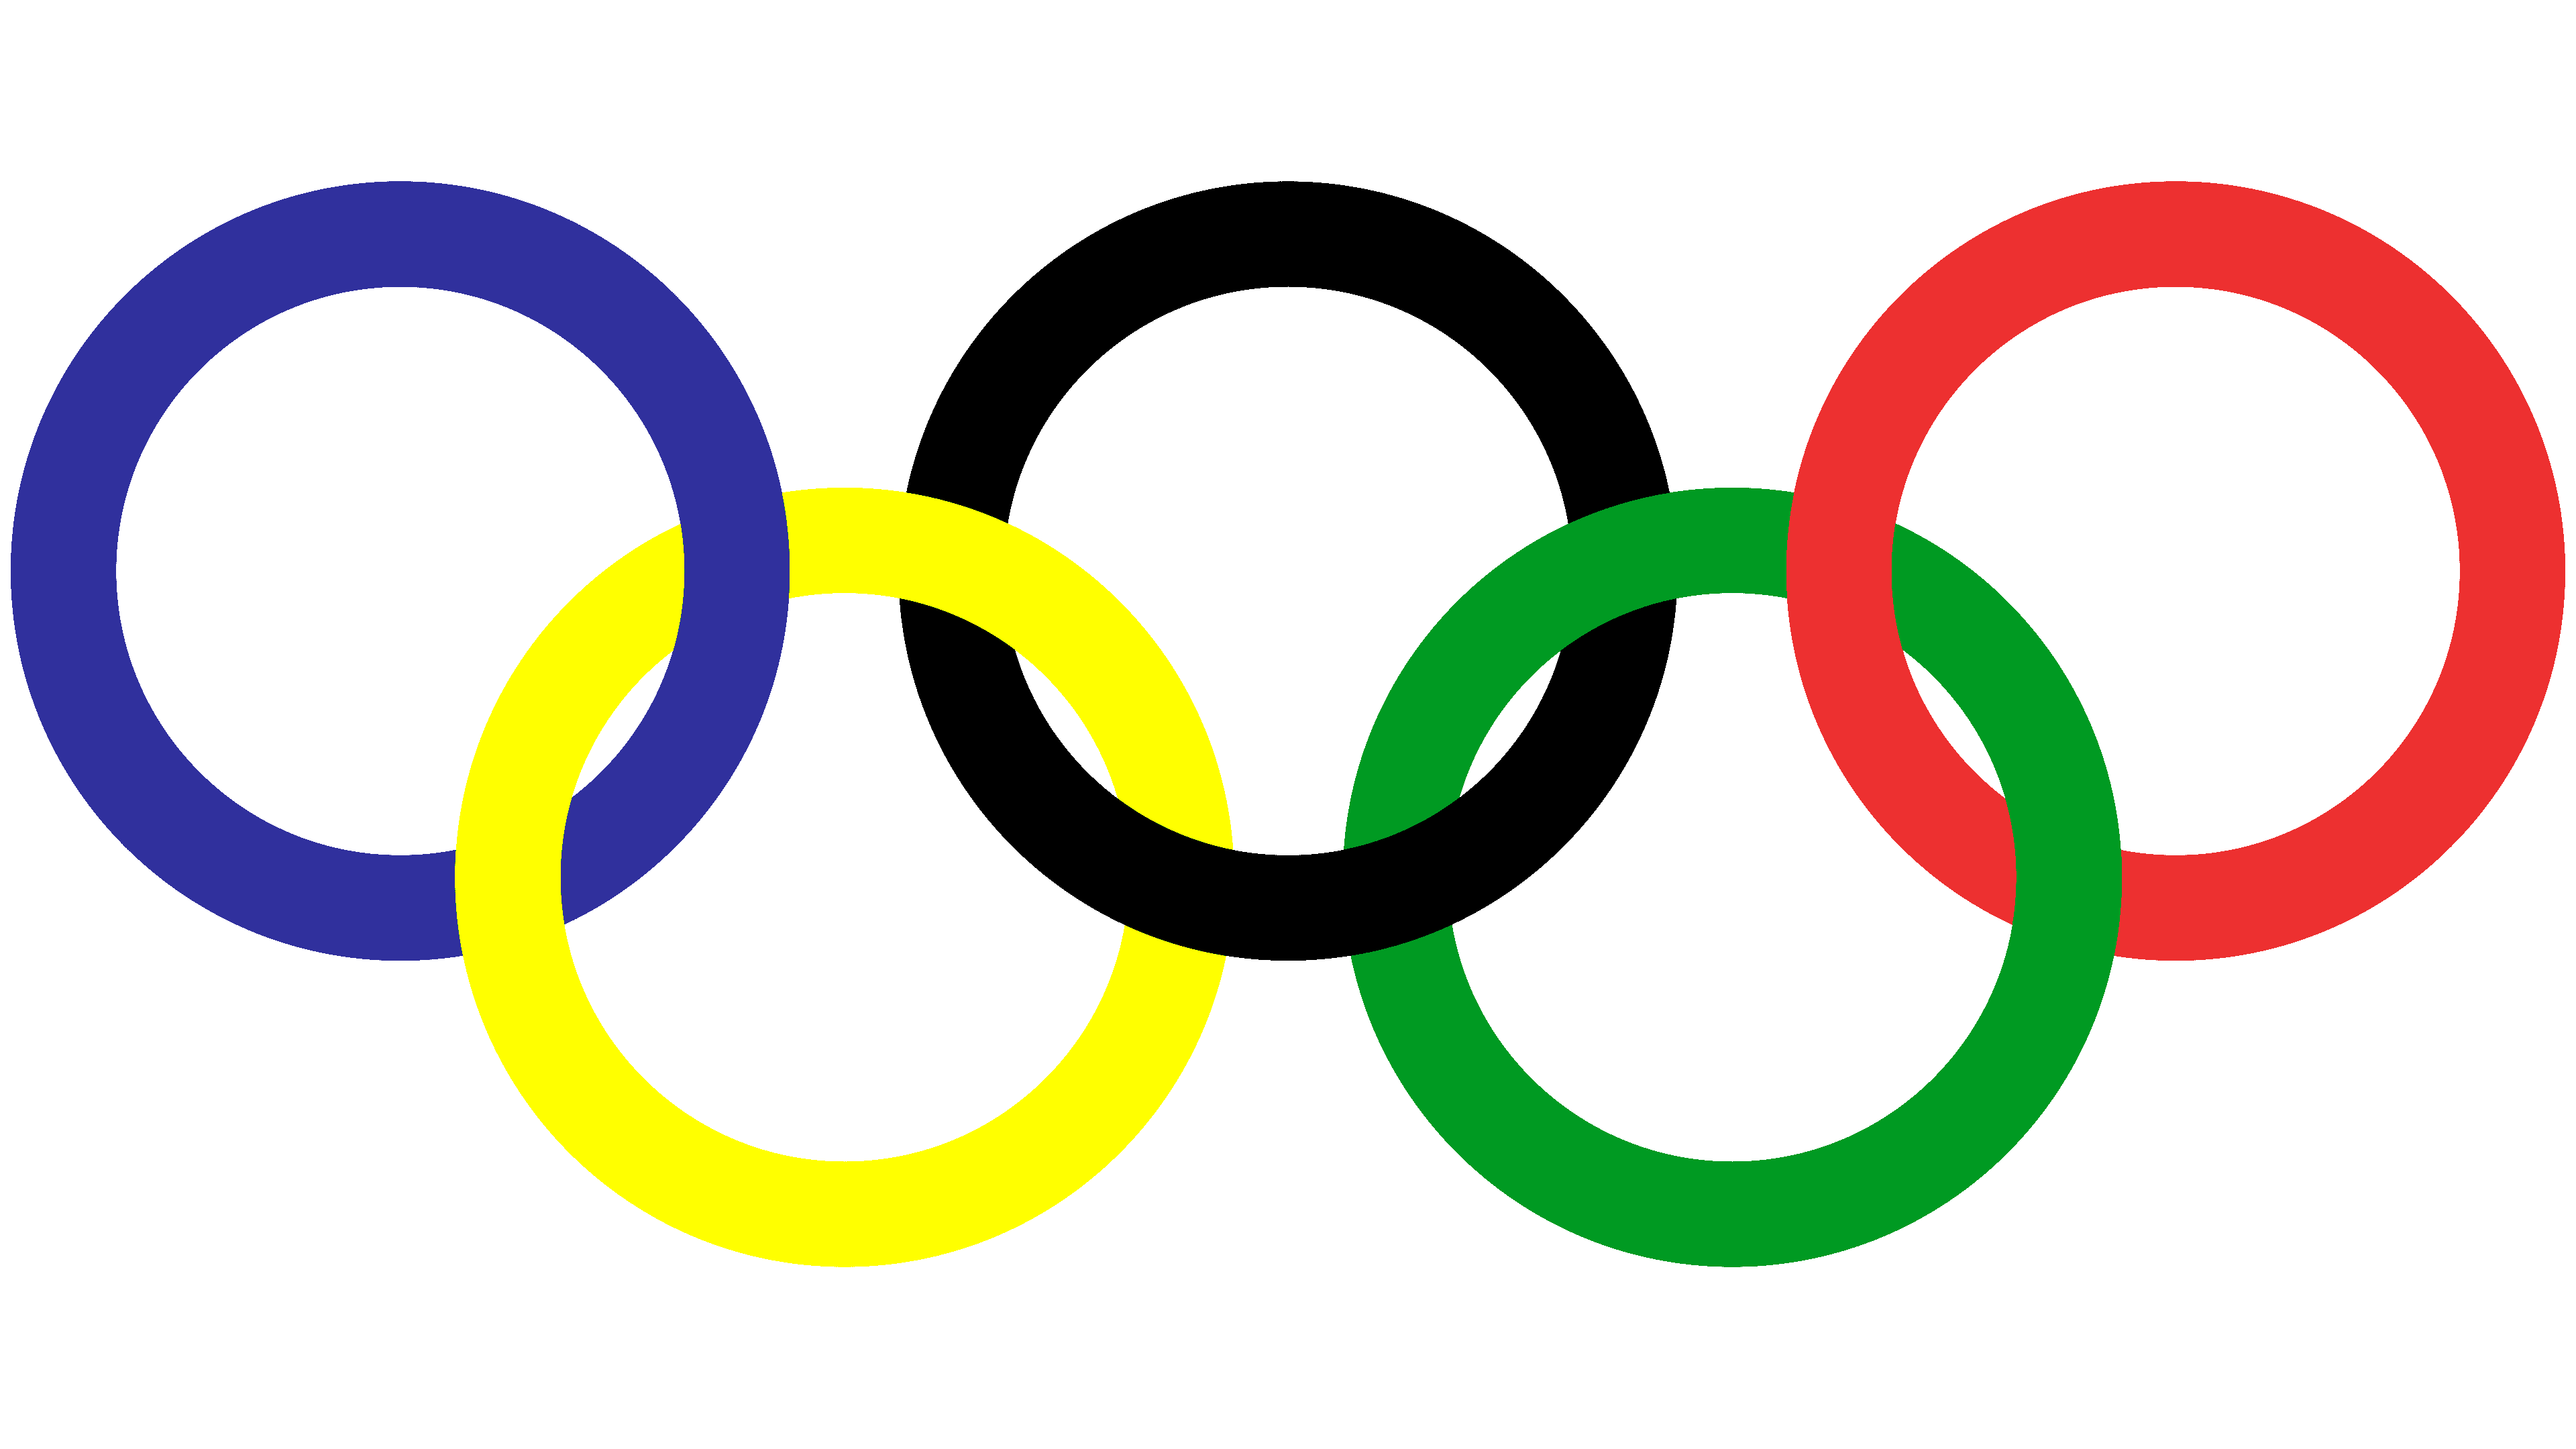 Olympics Rings Colours Meaning | Olympic Flag Colors | Cartoon Sports -  YouTube